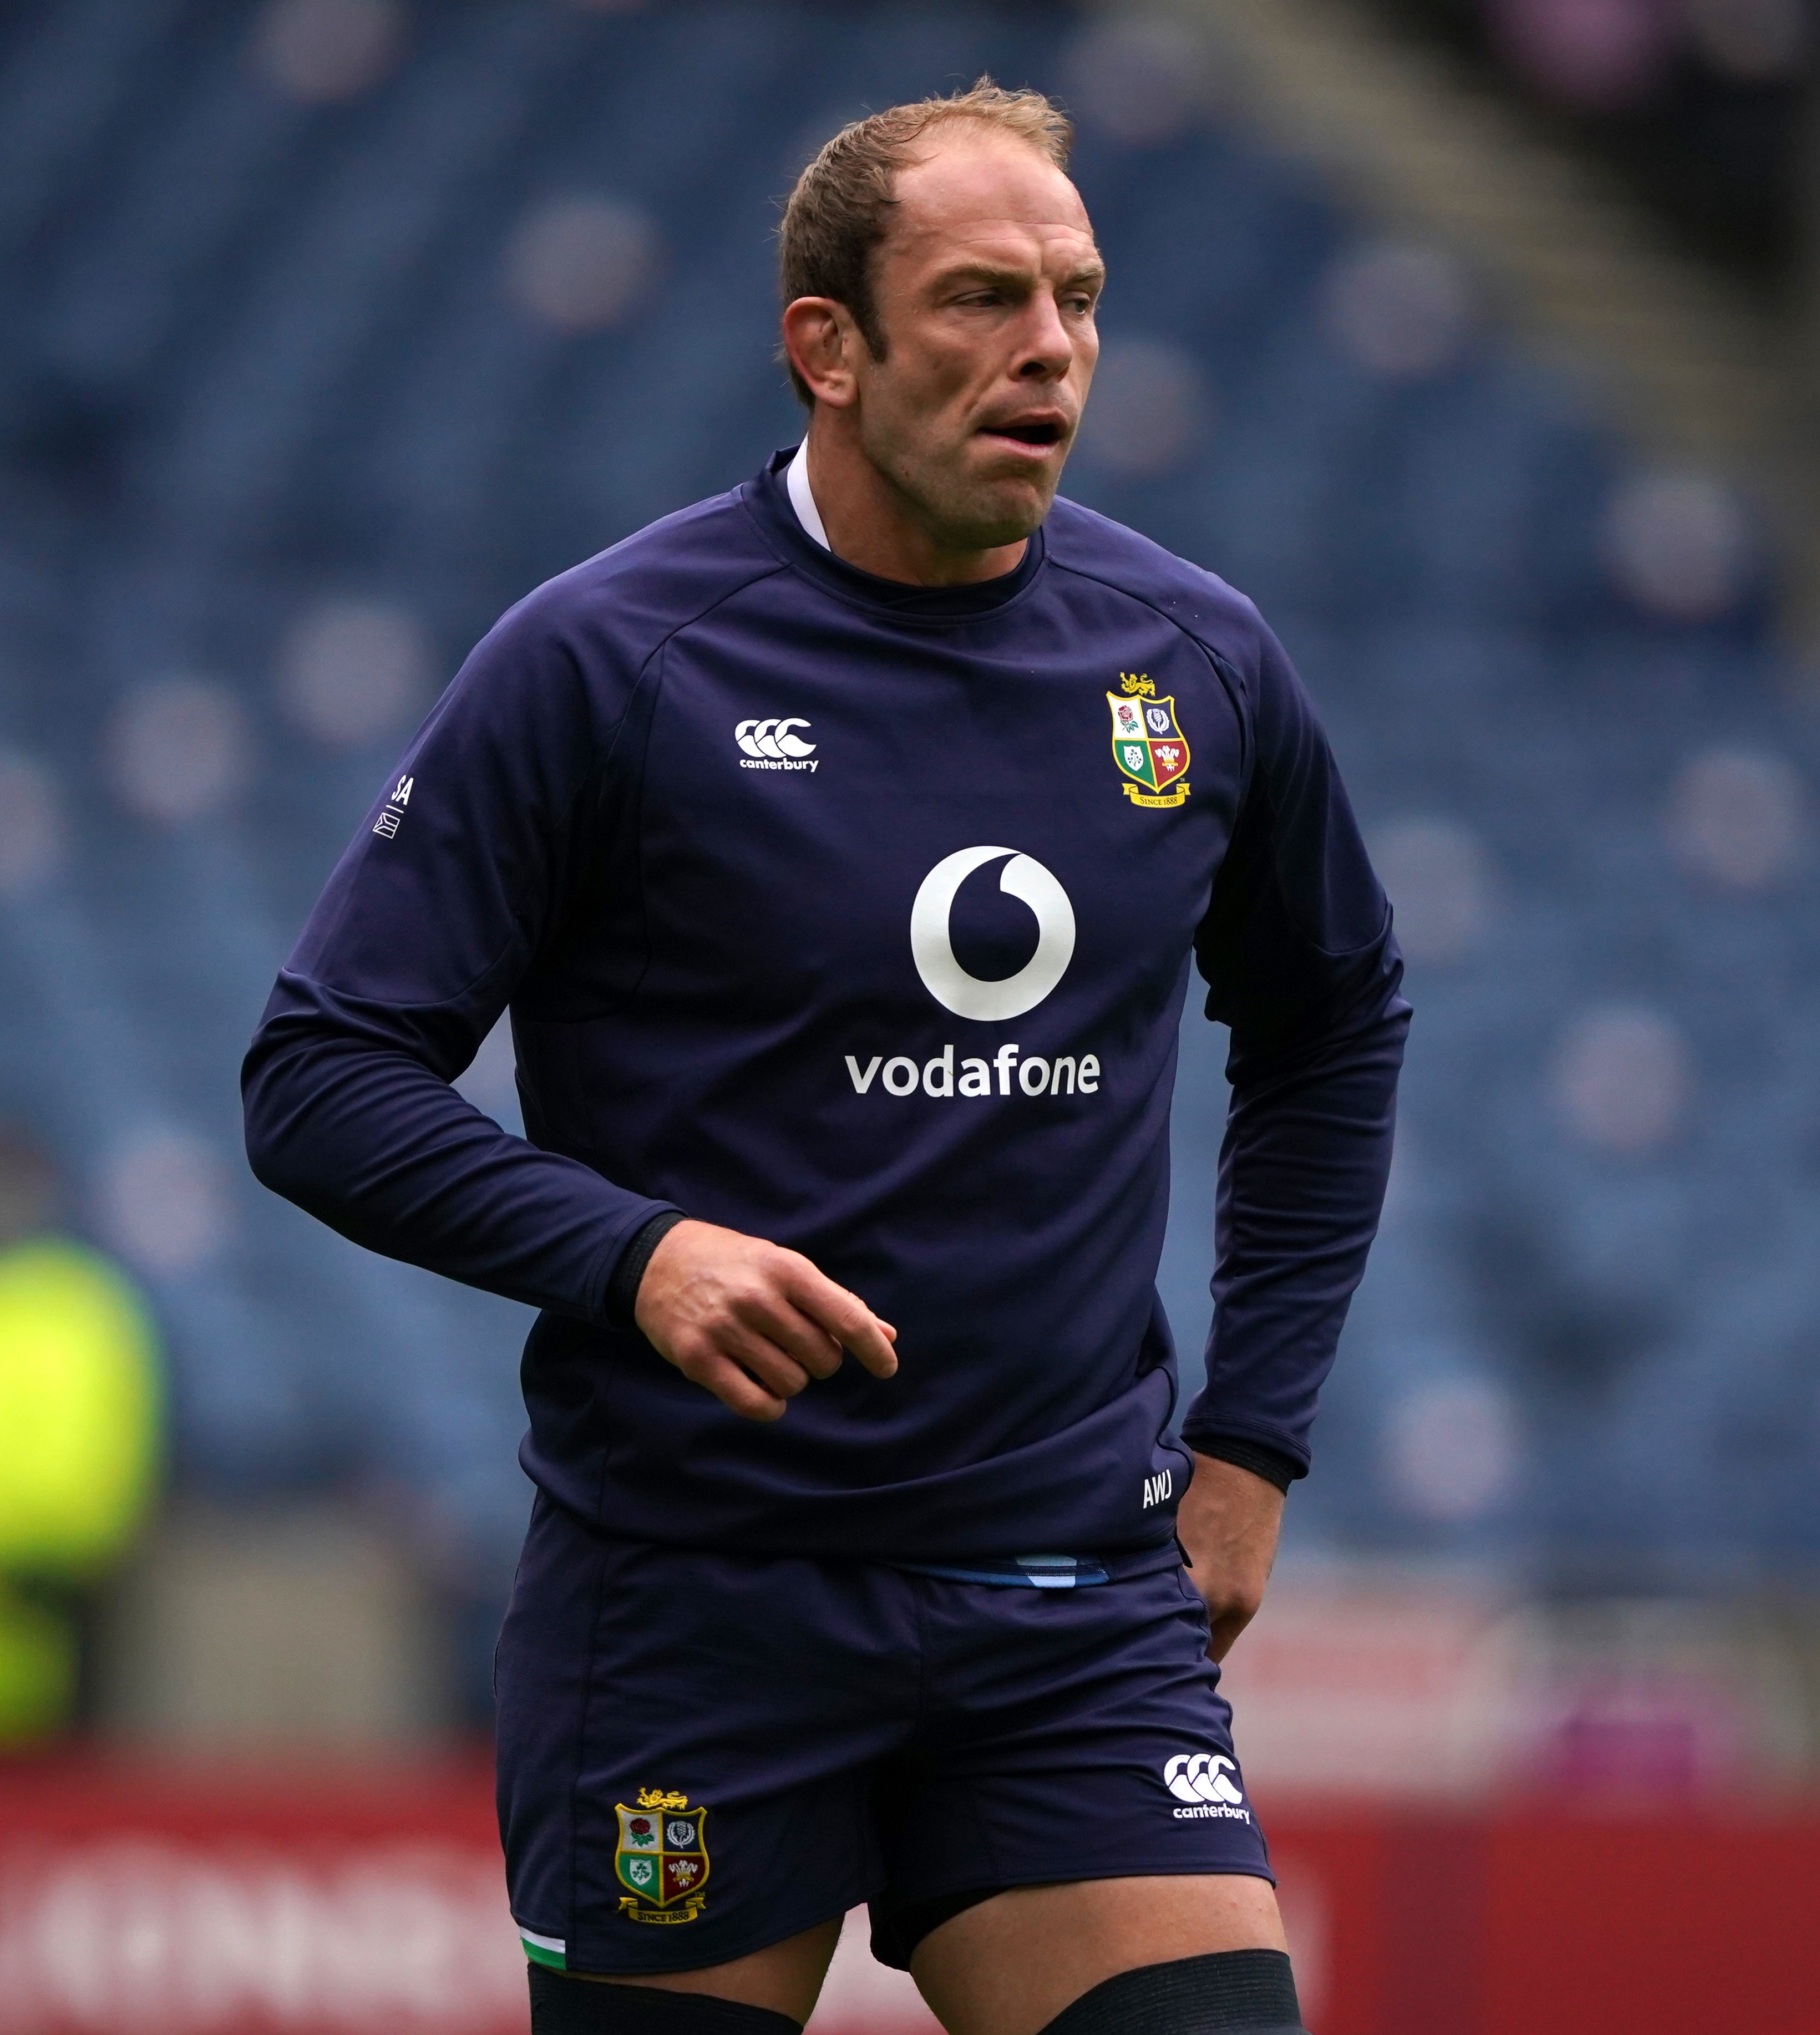 Alun Wyn Jones says it is time for the Lions' players to take centre stage